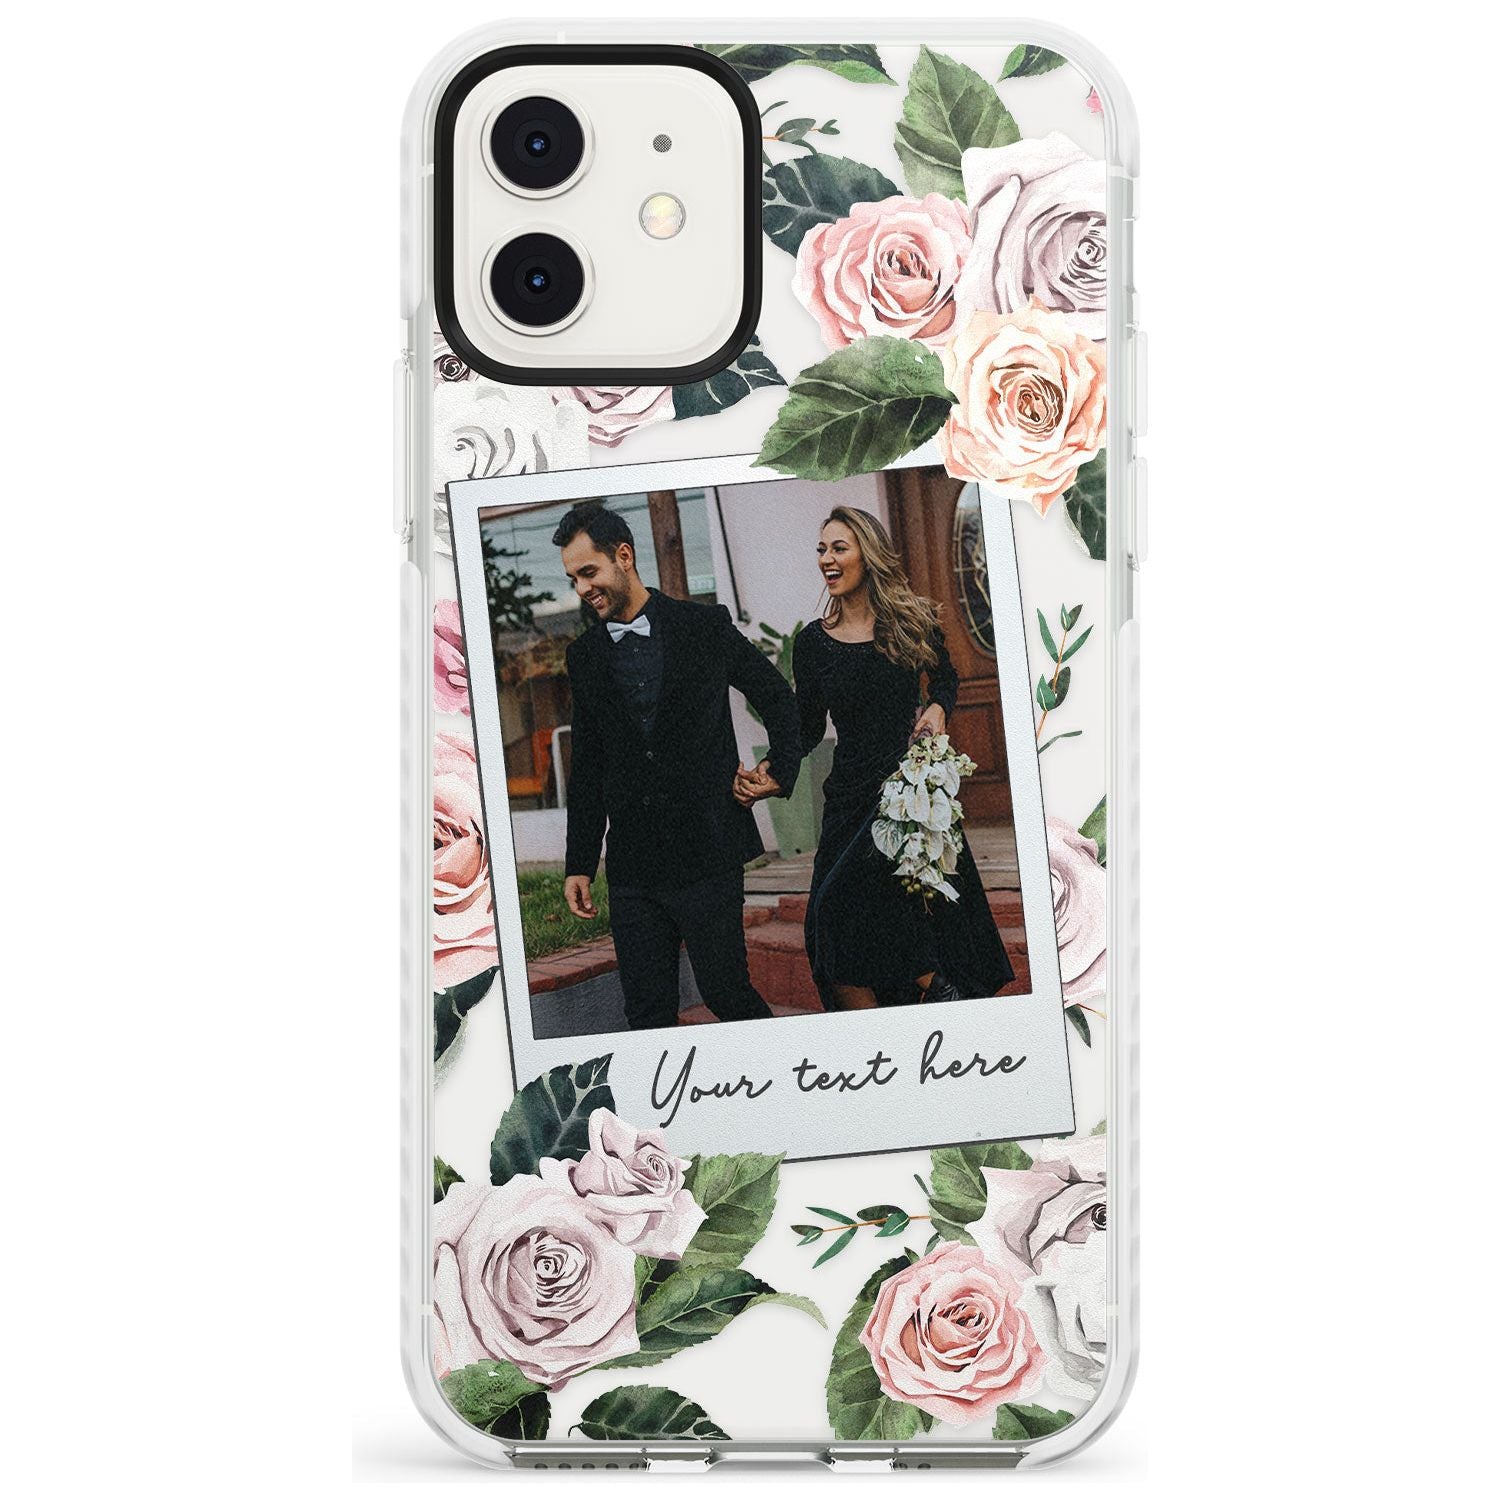 Floral Instant Film Slim TPU Phone Case for iPhone 11